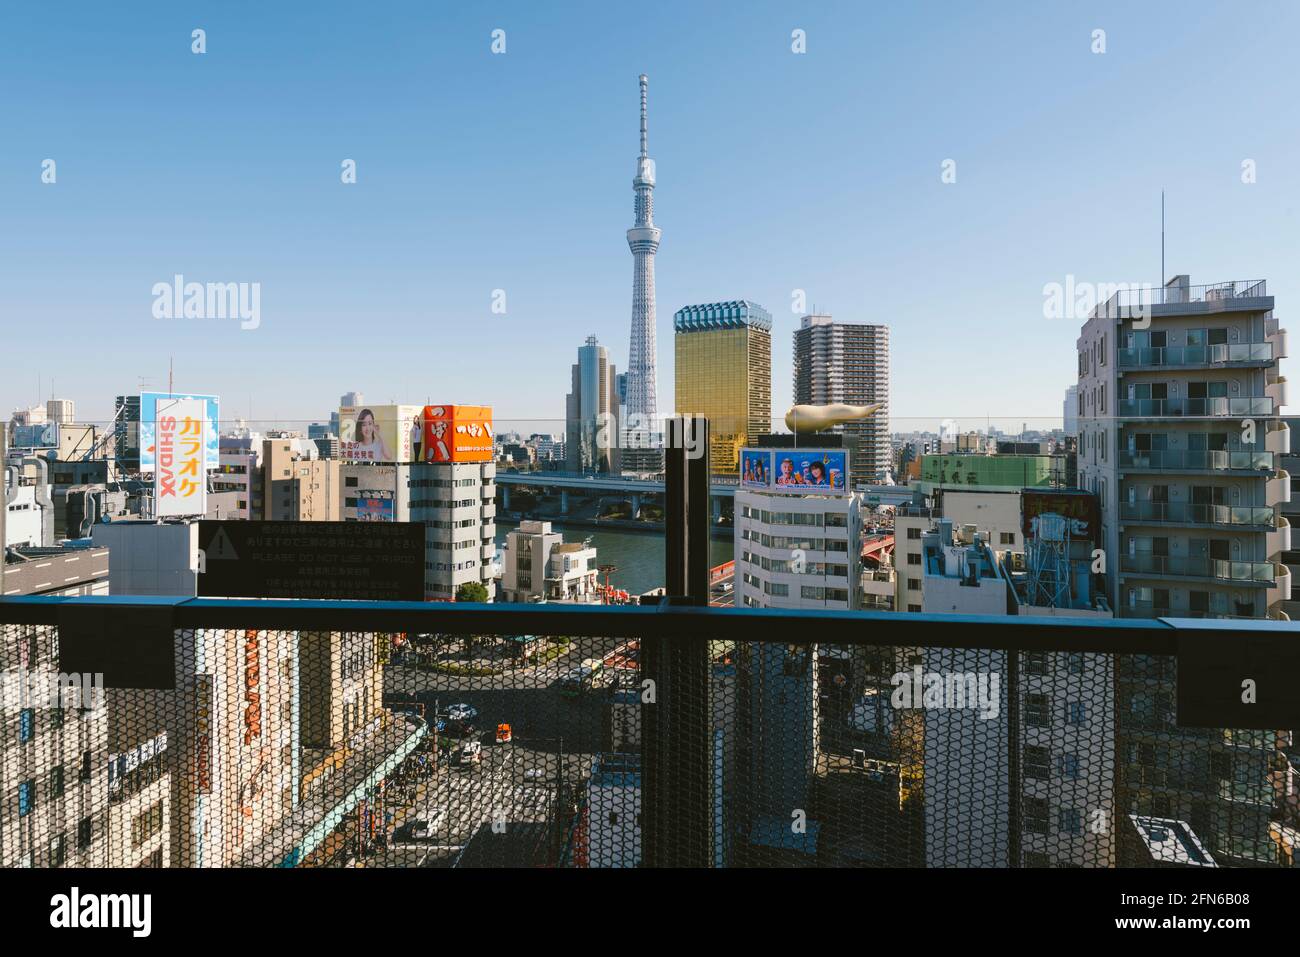 Tokyo, Japan - January 10, 2016: Japanese tourist enjoying the view from the top floor of the Asakusa Culture Tourist Information Center. Stock Photo